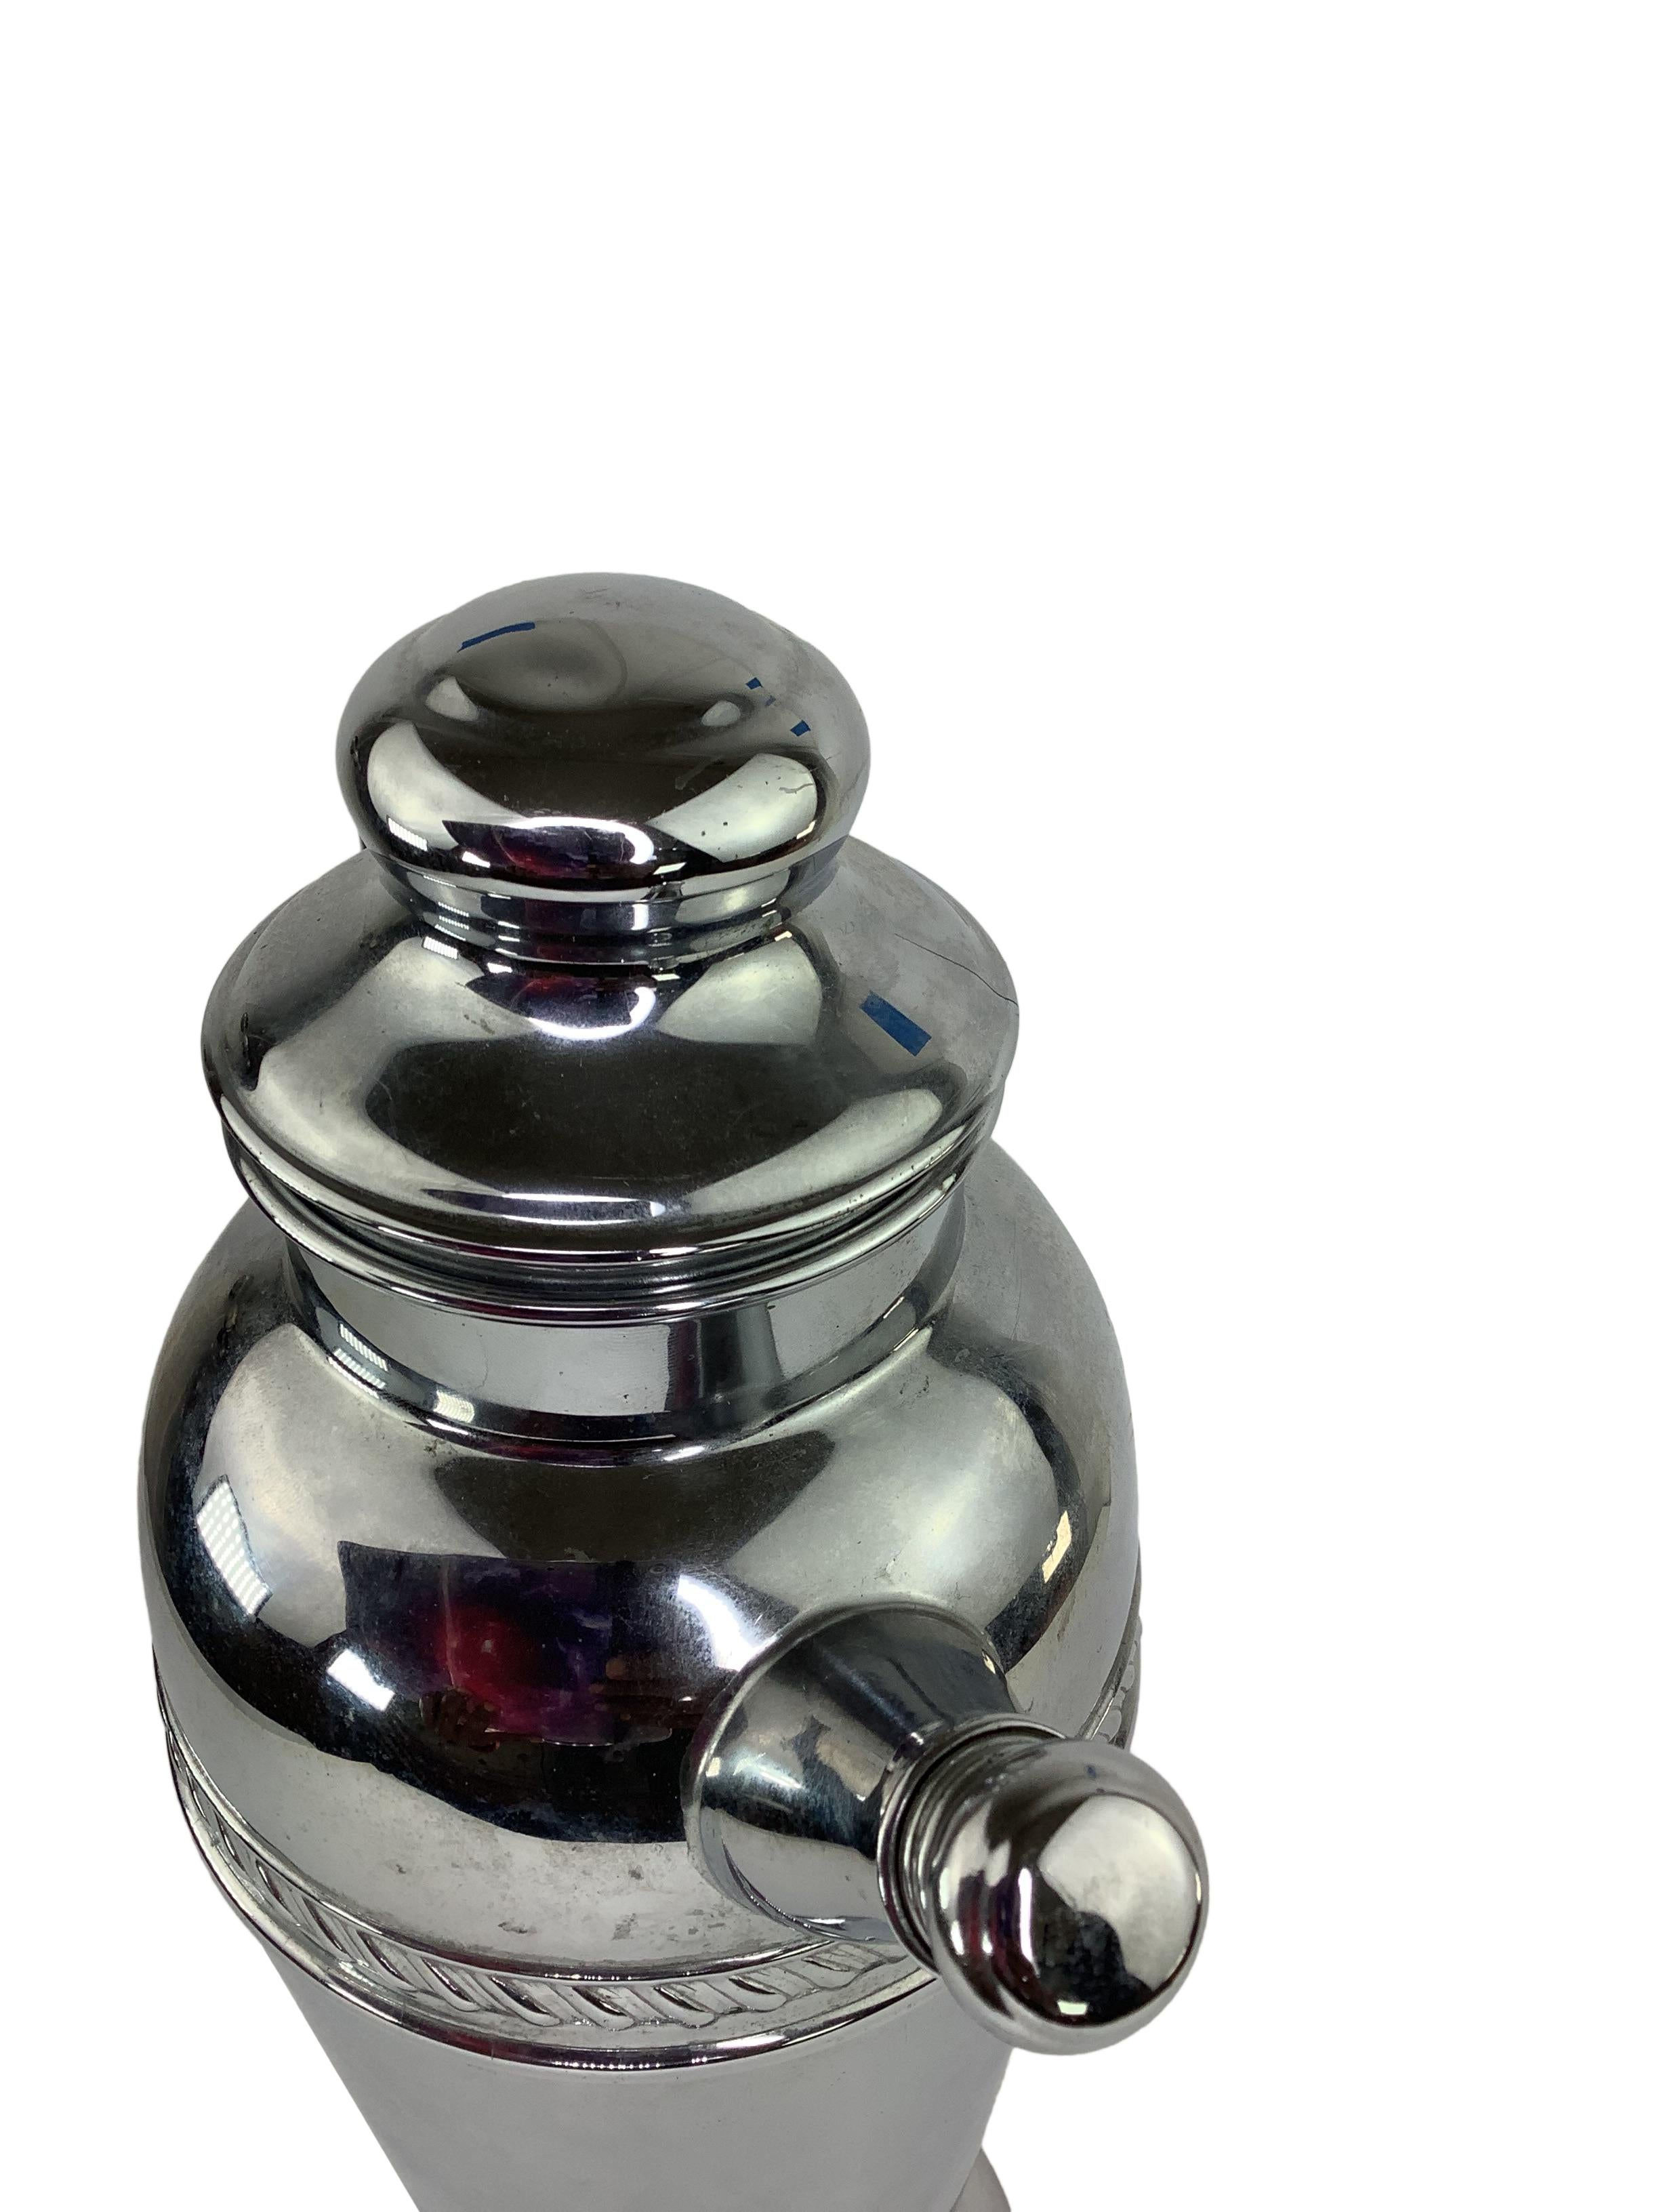 Vintage Art Deco Chrome Plated Cocktail Shaker. It's a relatively large shaker, which would have been used for mixing and serving cocktails. The chrome plating adds a shiny and luxurious appearance to the shaker, which is typical of the Art Deco